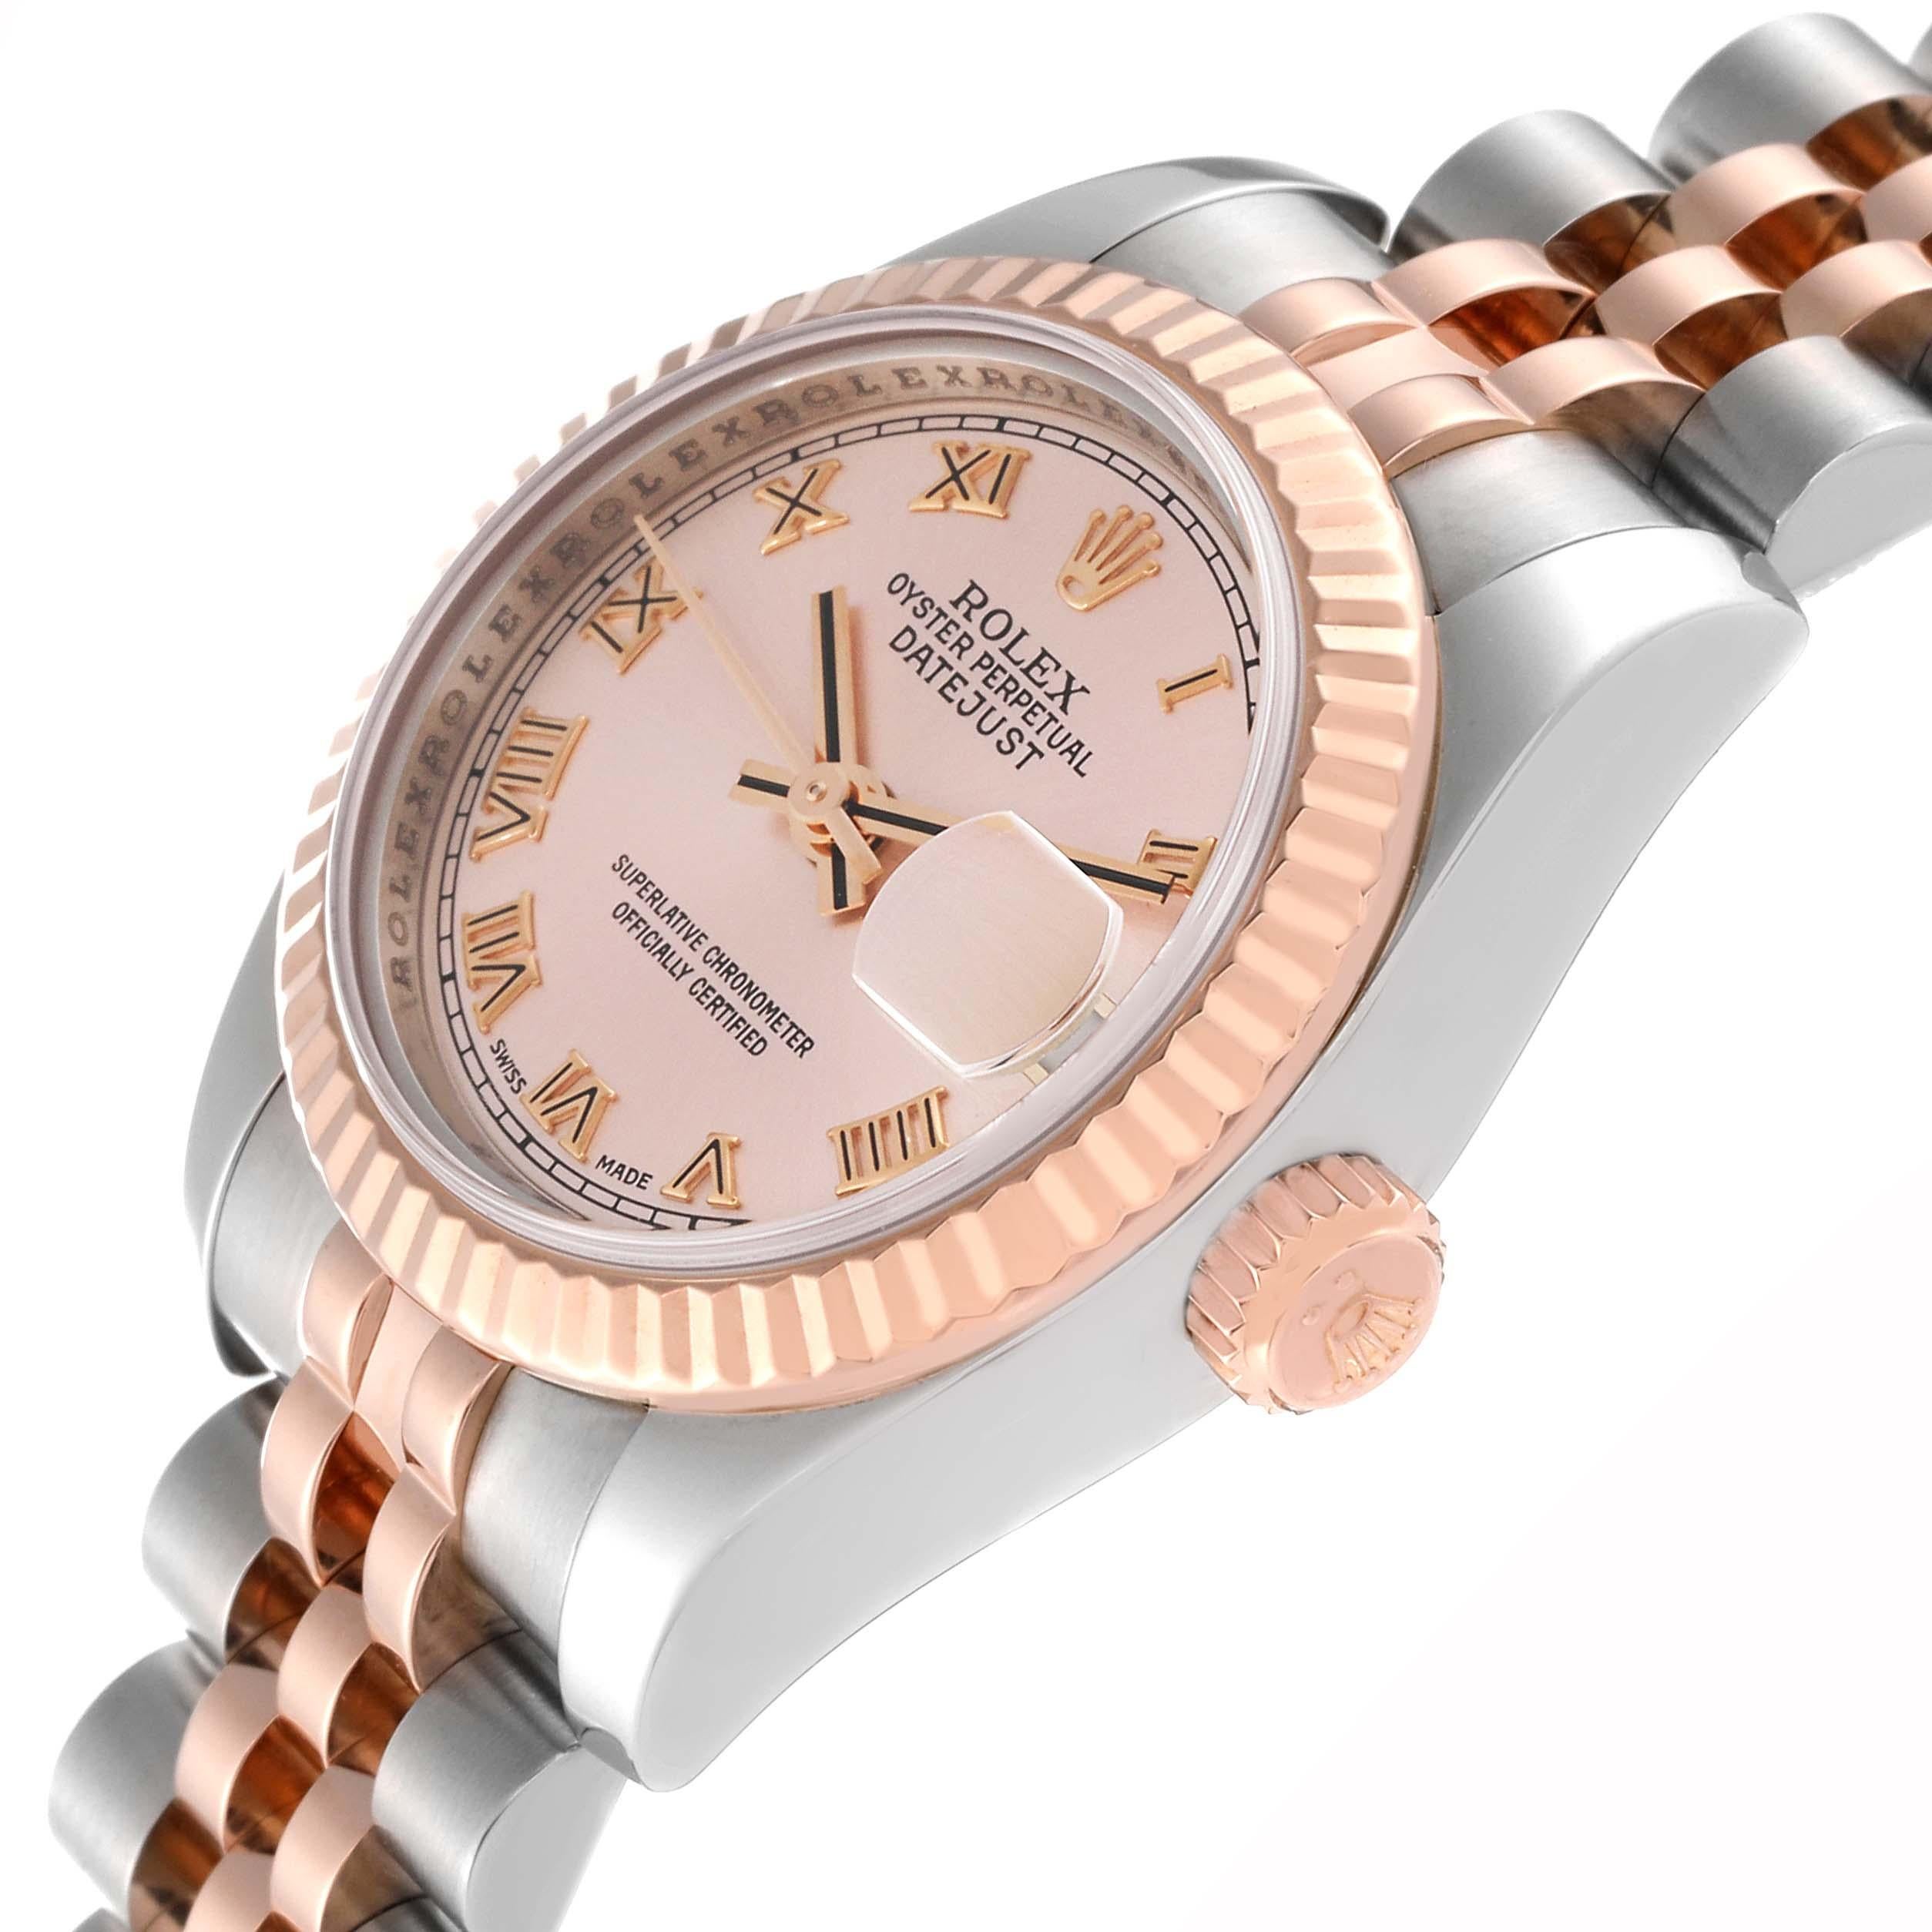 Rolex Datejust Steel Rose Gold Ladies Watch 179171 Box Papers In Excellent Condition For Sale In Atlanta, GA